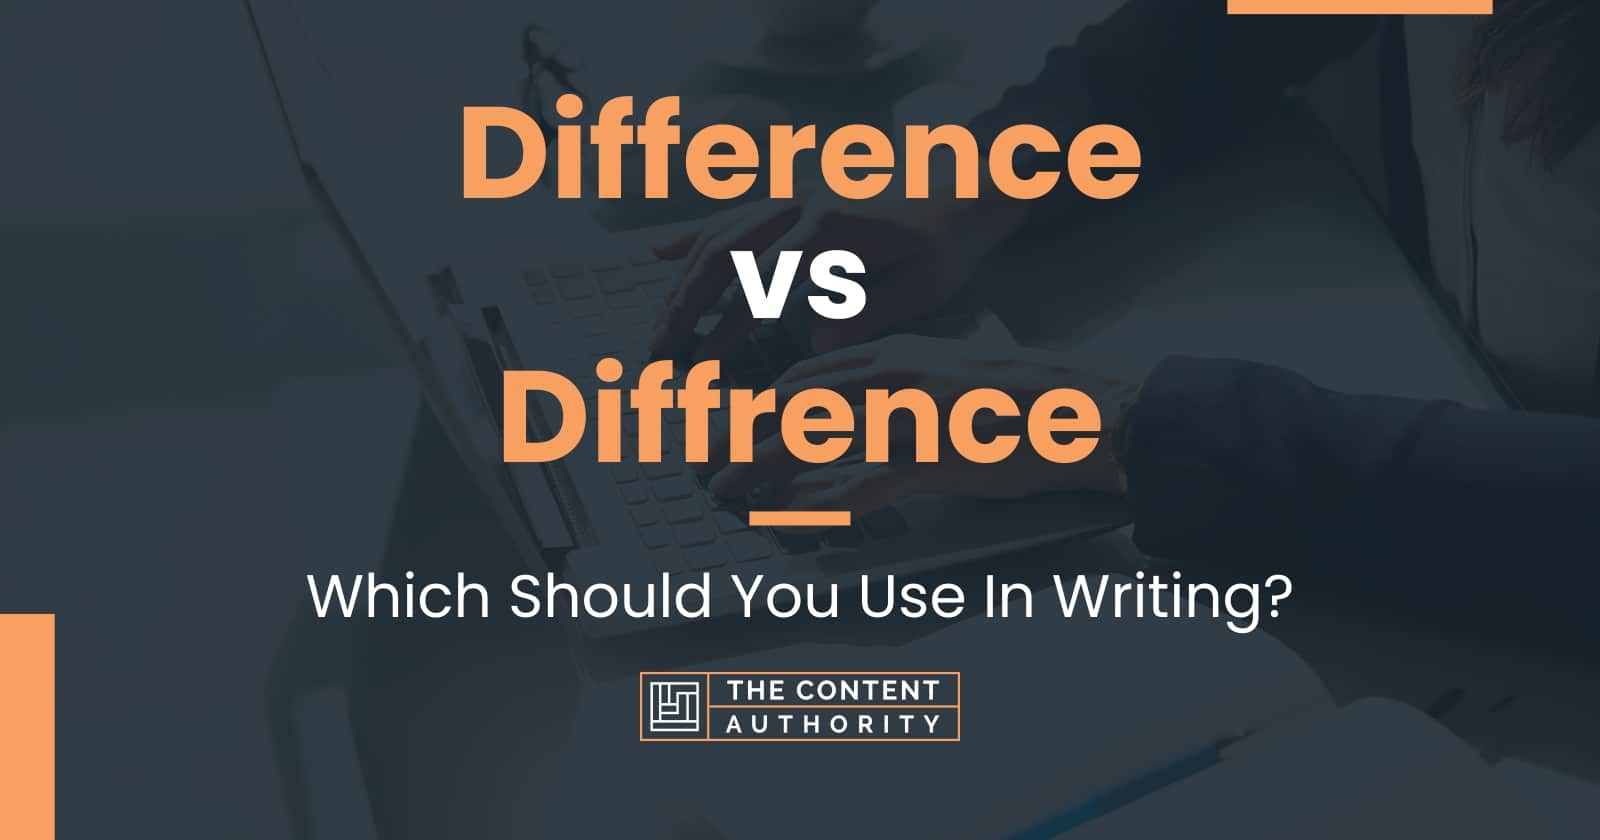 Difference vs Diffrence: Which Should You Use In Writing?